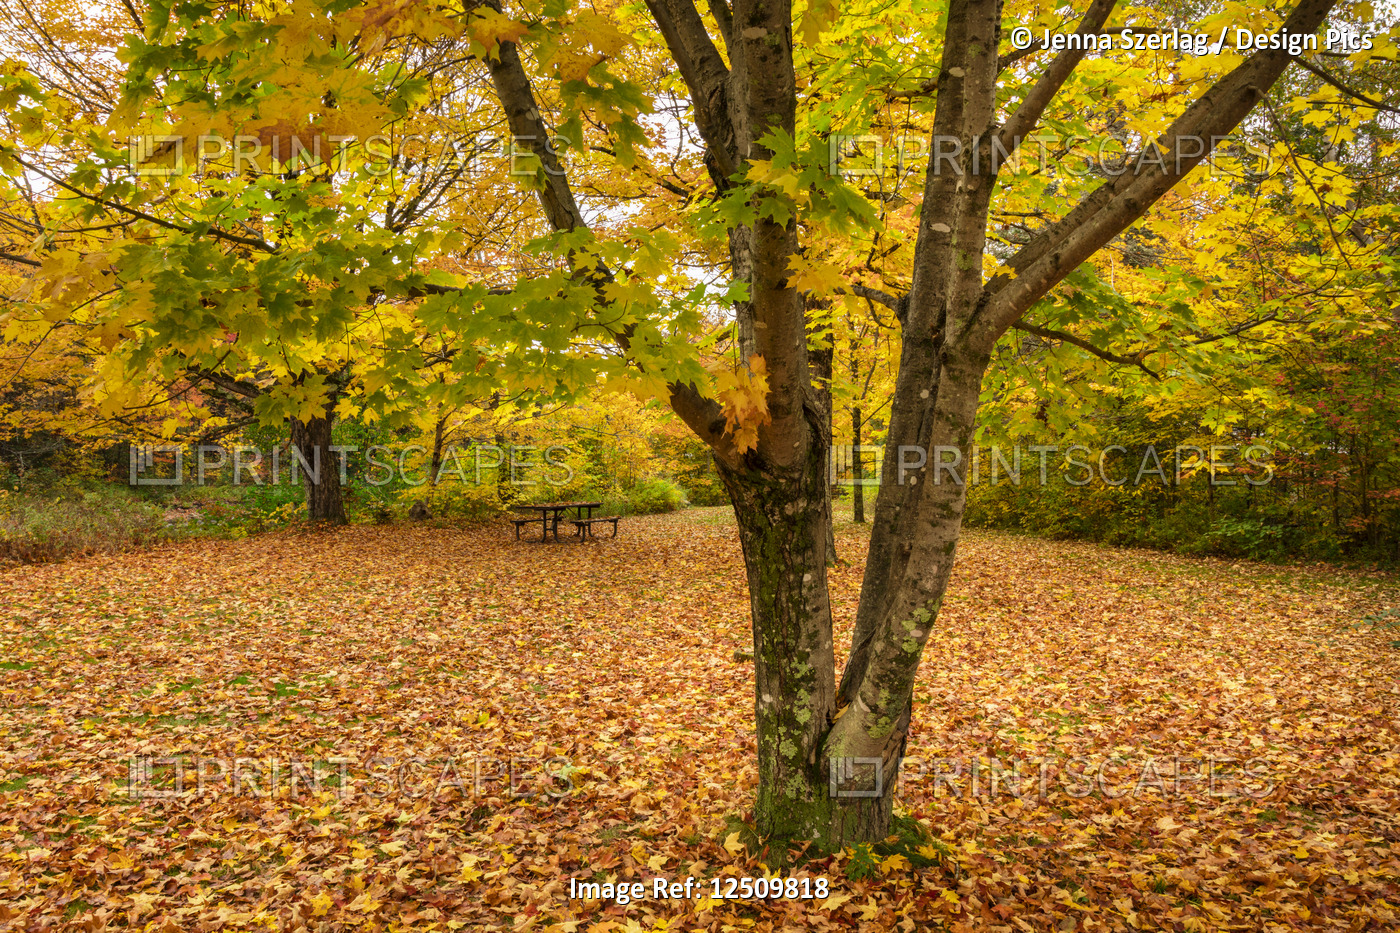 Zealand Picnic Area with autumn coloured foliage on a tree and fallen leaves on ...